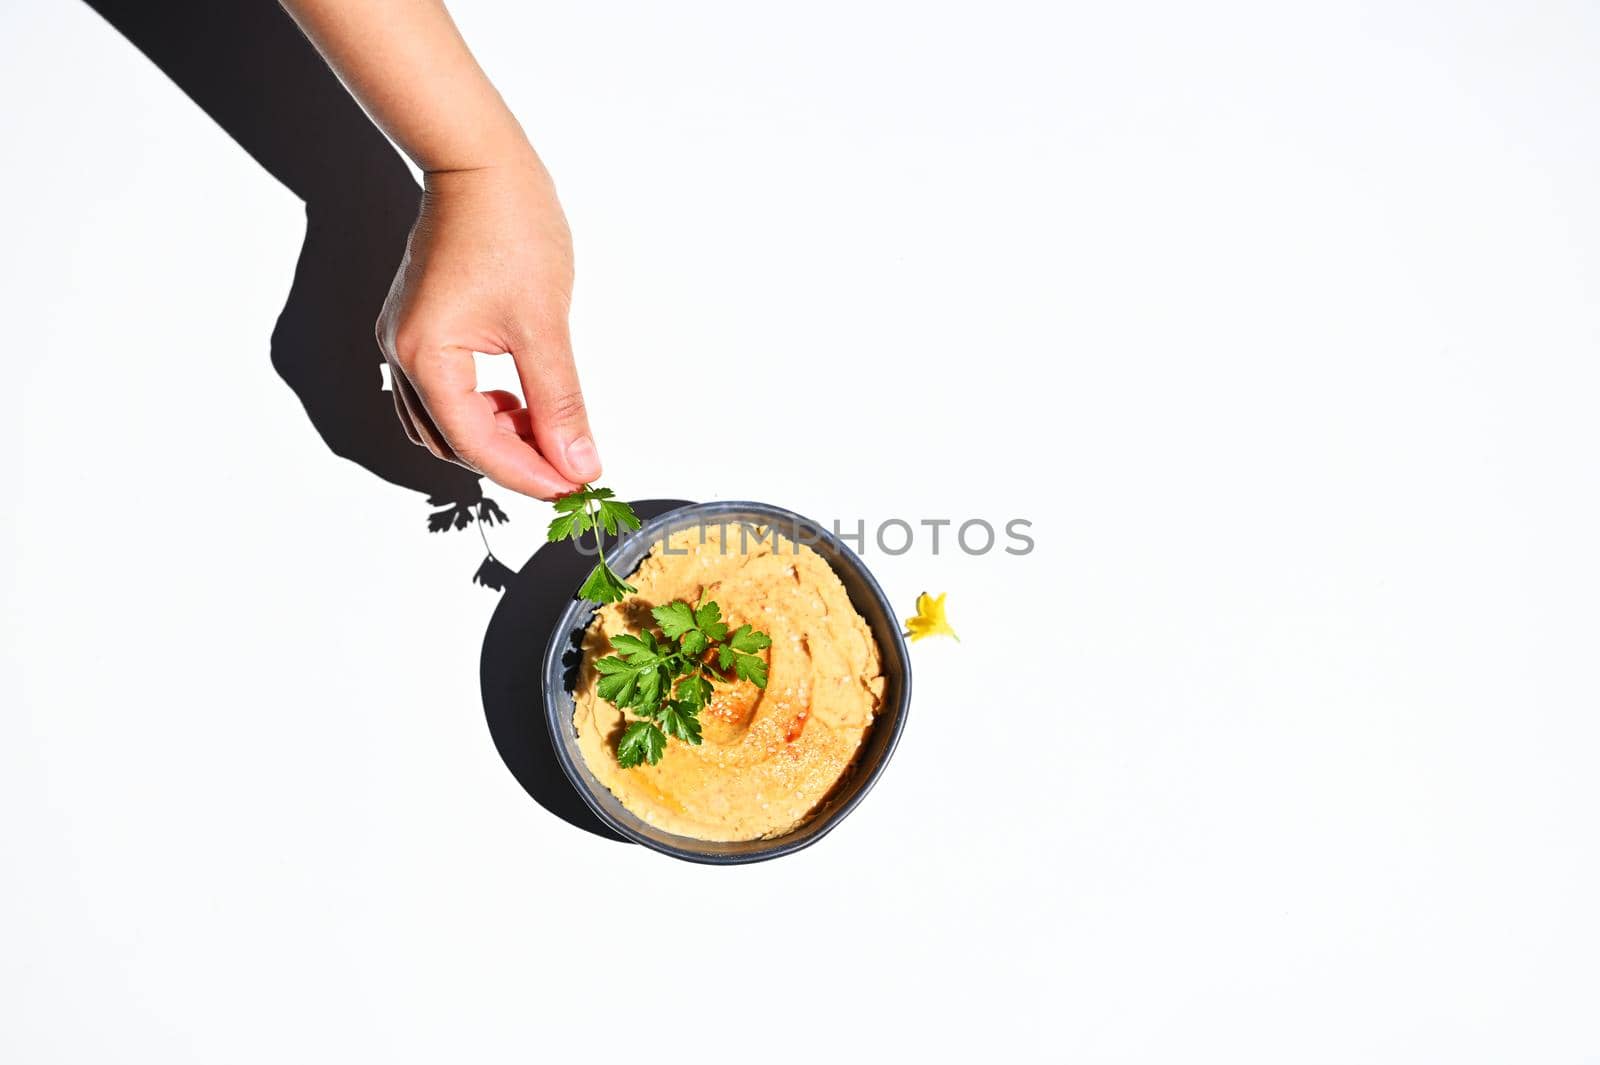 View from above of a hand holding parsley next to a bowl with hummus, isolated over white background with copy space for text